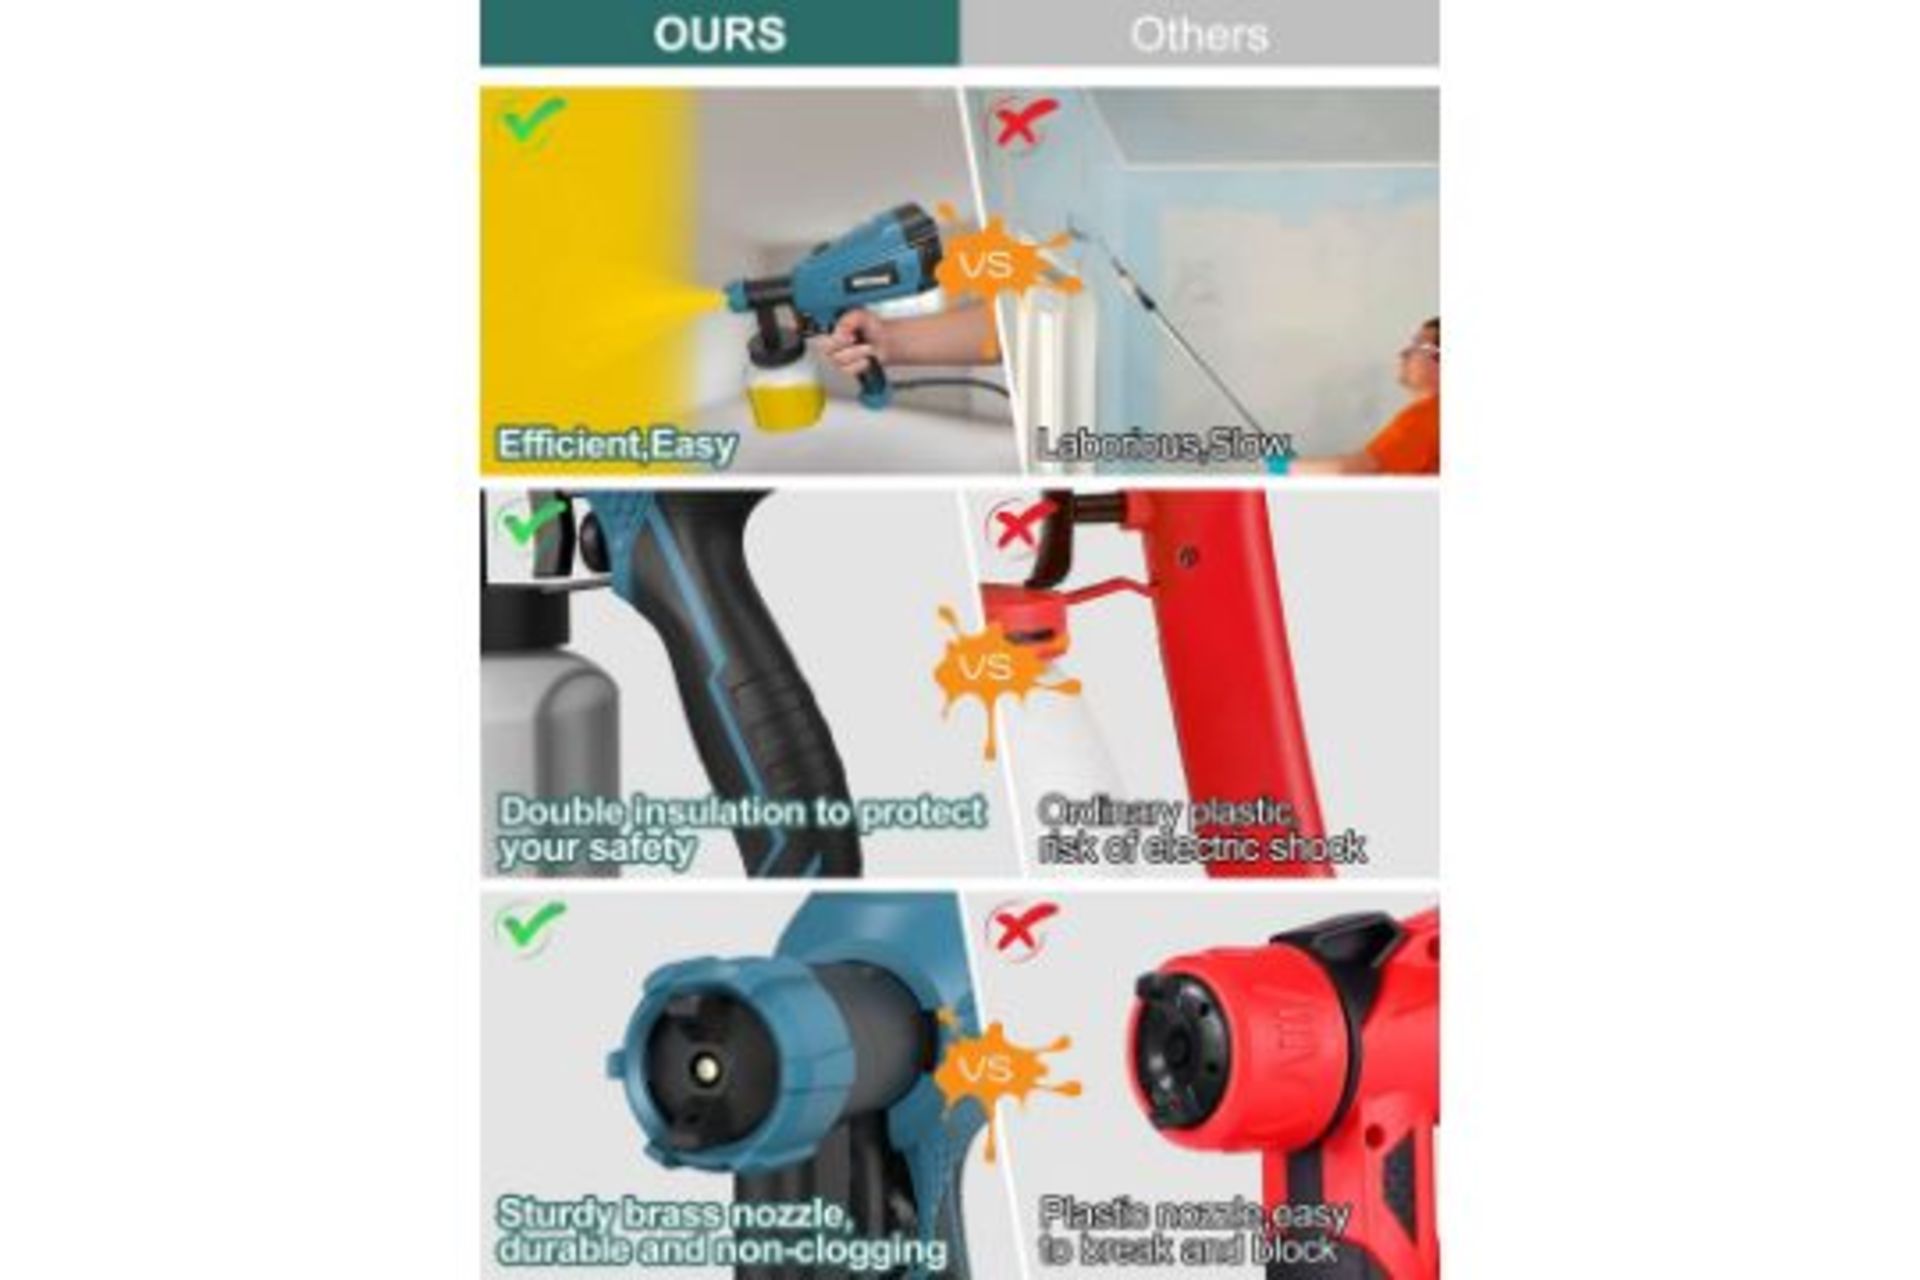 2 x New Boxed WESCO 18V 2.0AH 500ml/min Paint Spray Gun with 2.5mm Nozzles and 3 Spray Patterns, 800 - Image 2 of 2